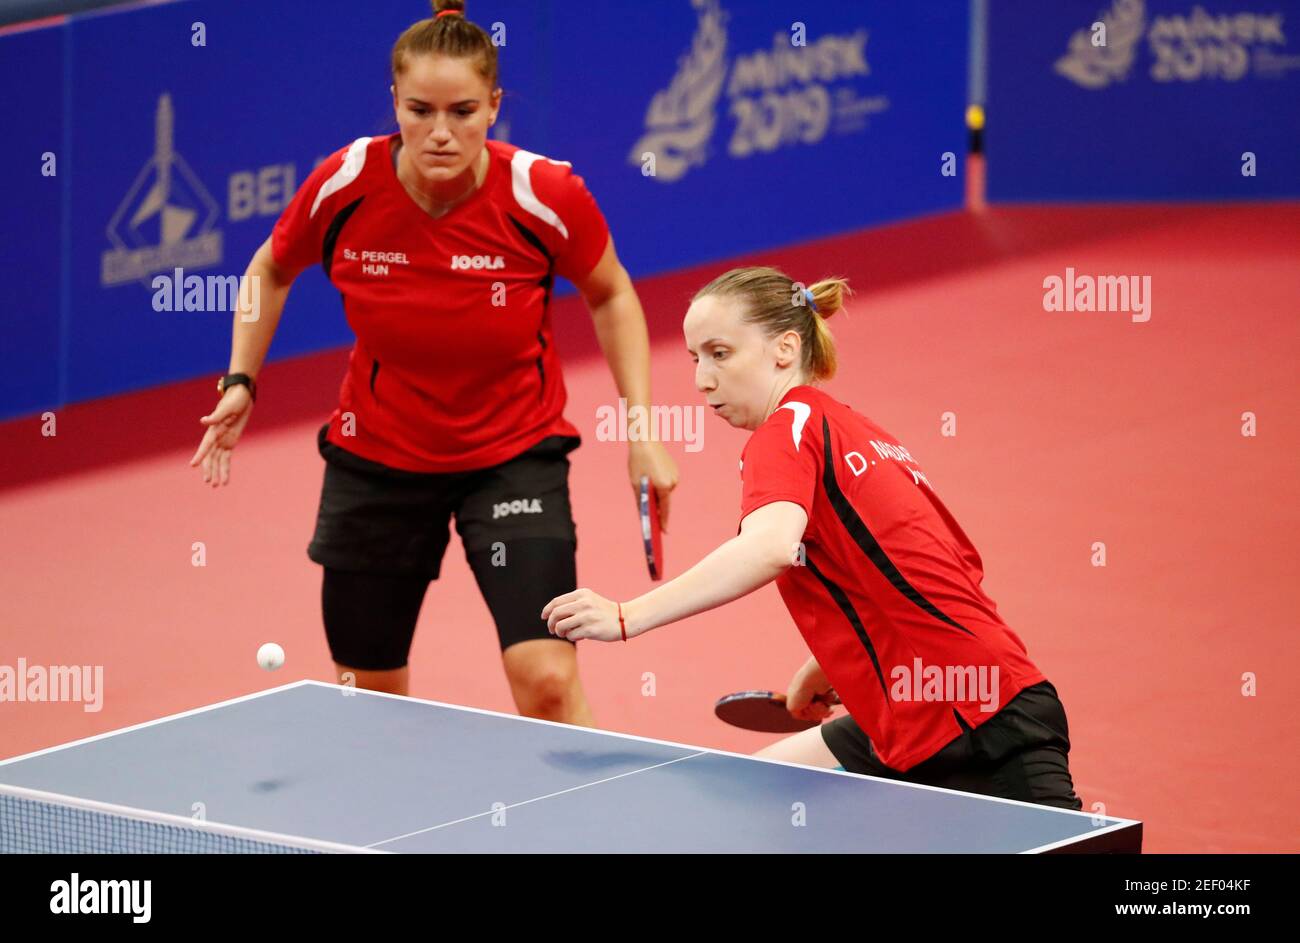 2019 European Games - Table Tennis - Women's Team - Tennis Olympic Centre,  Minsk, Belarus - June 29, 2019. Hungary's Dora Madarasz and Szandra Pergel  in action during match one of the